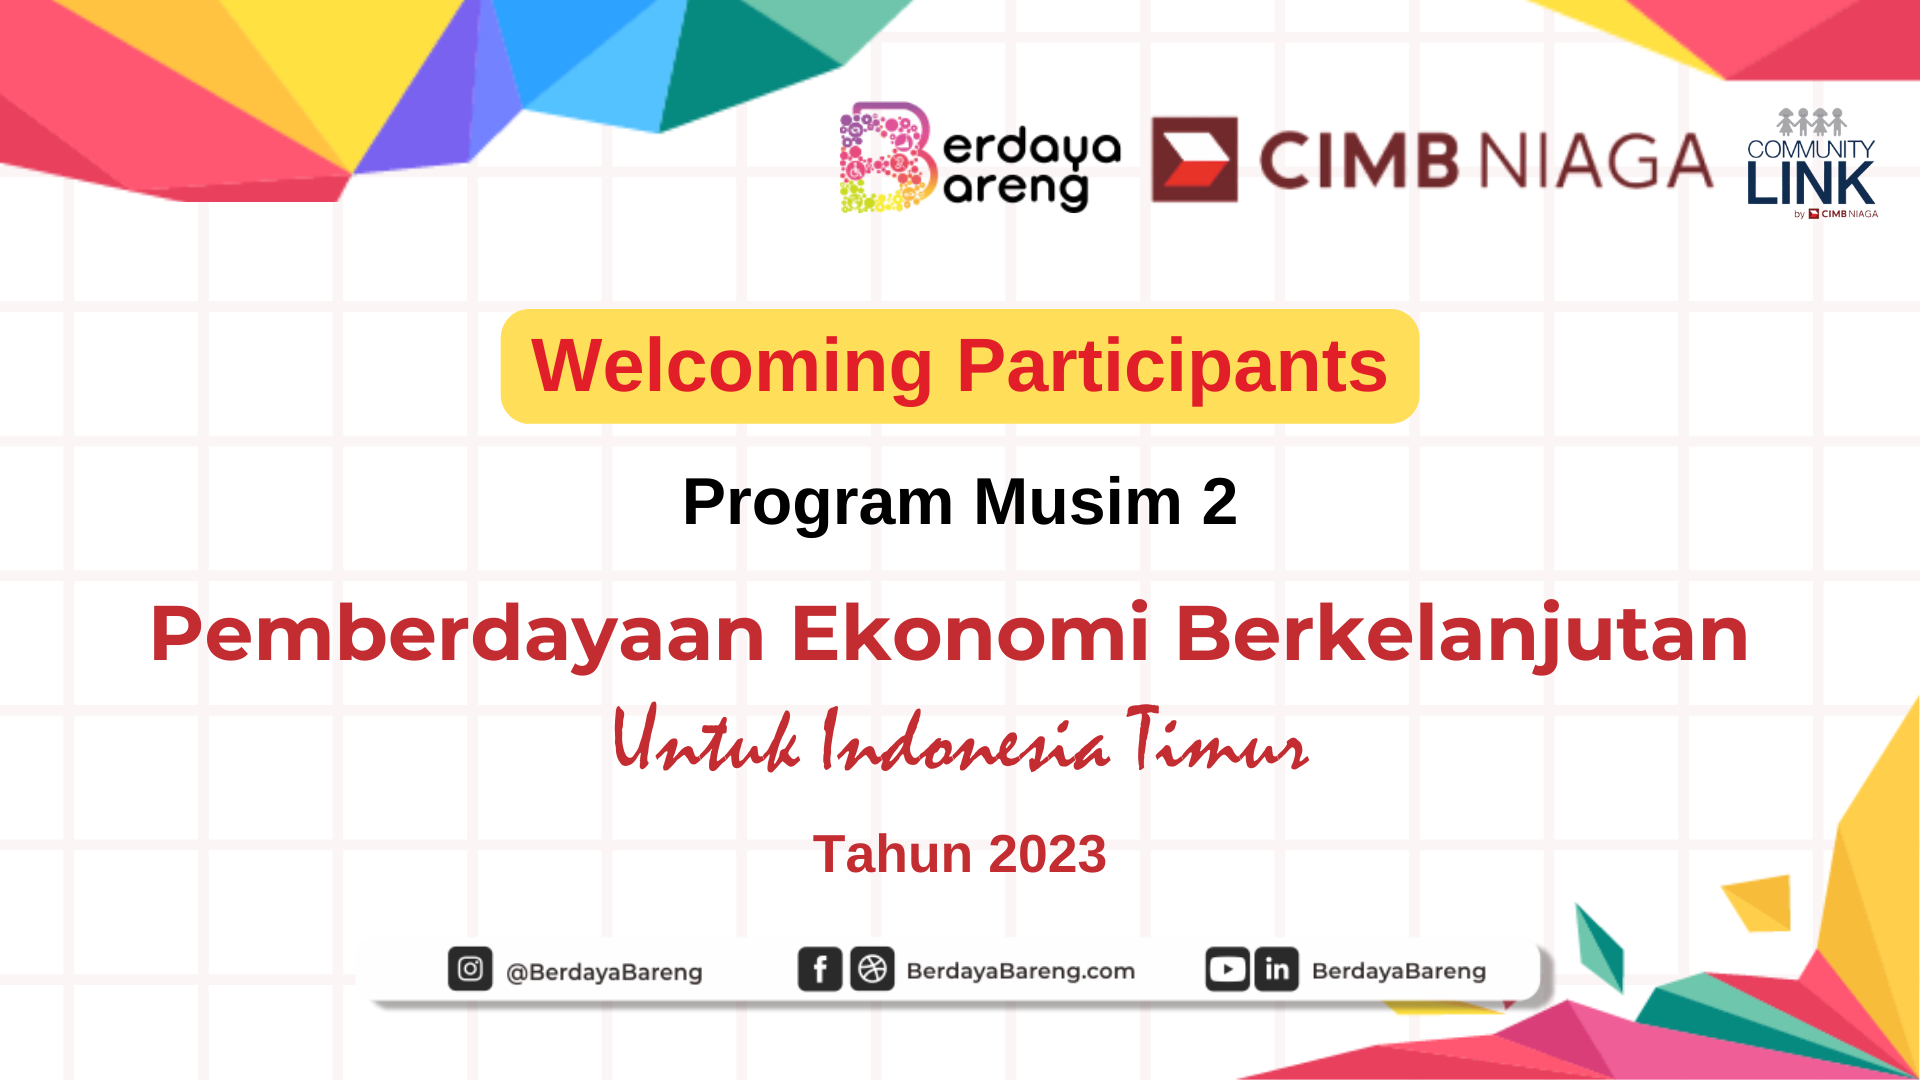 CIMB-Welcome Participants (1).png-1695632923.png